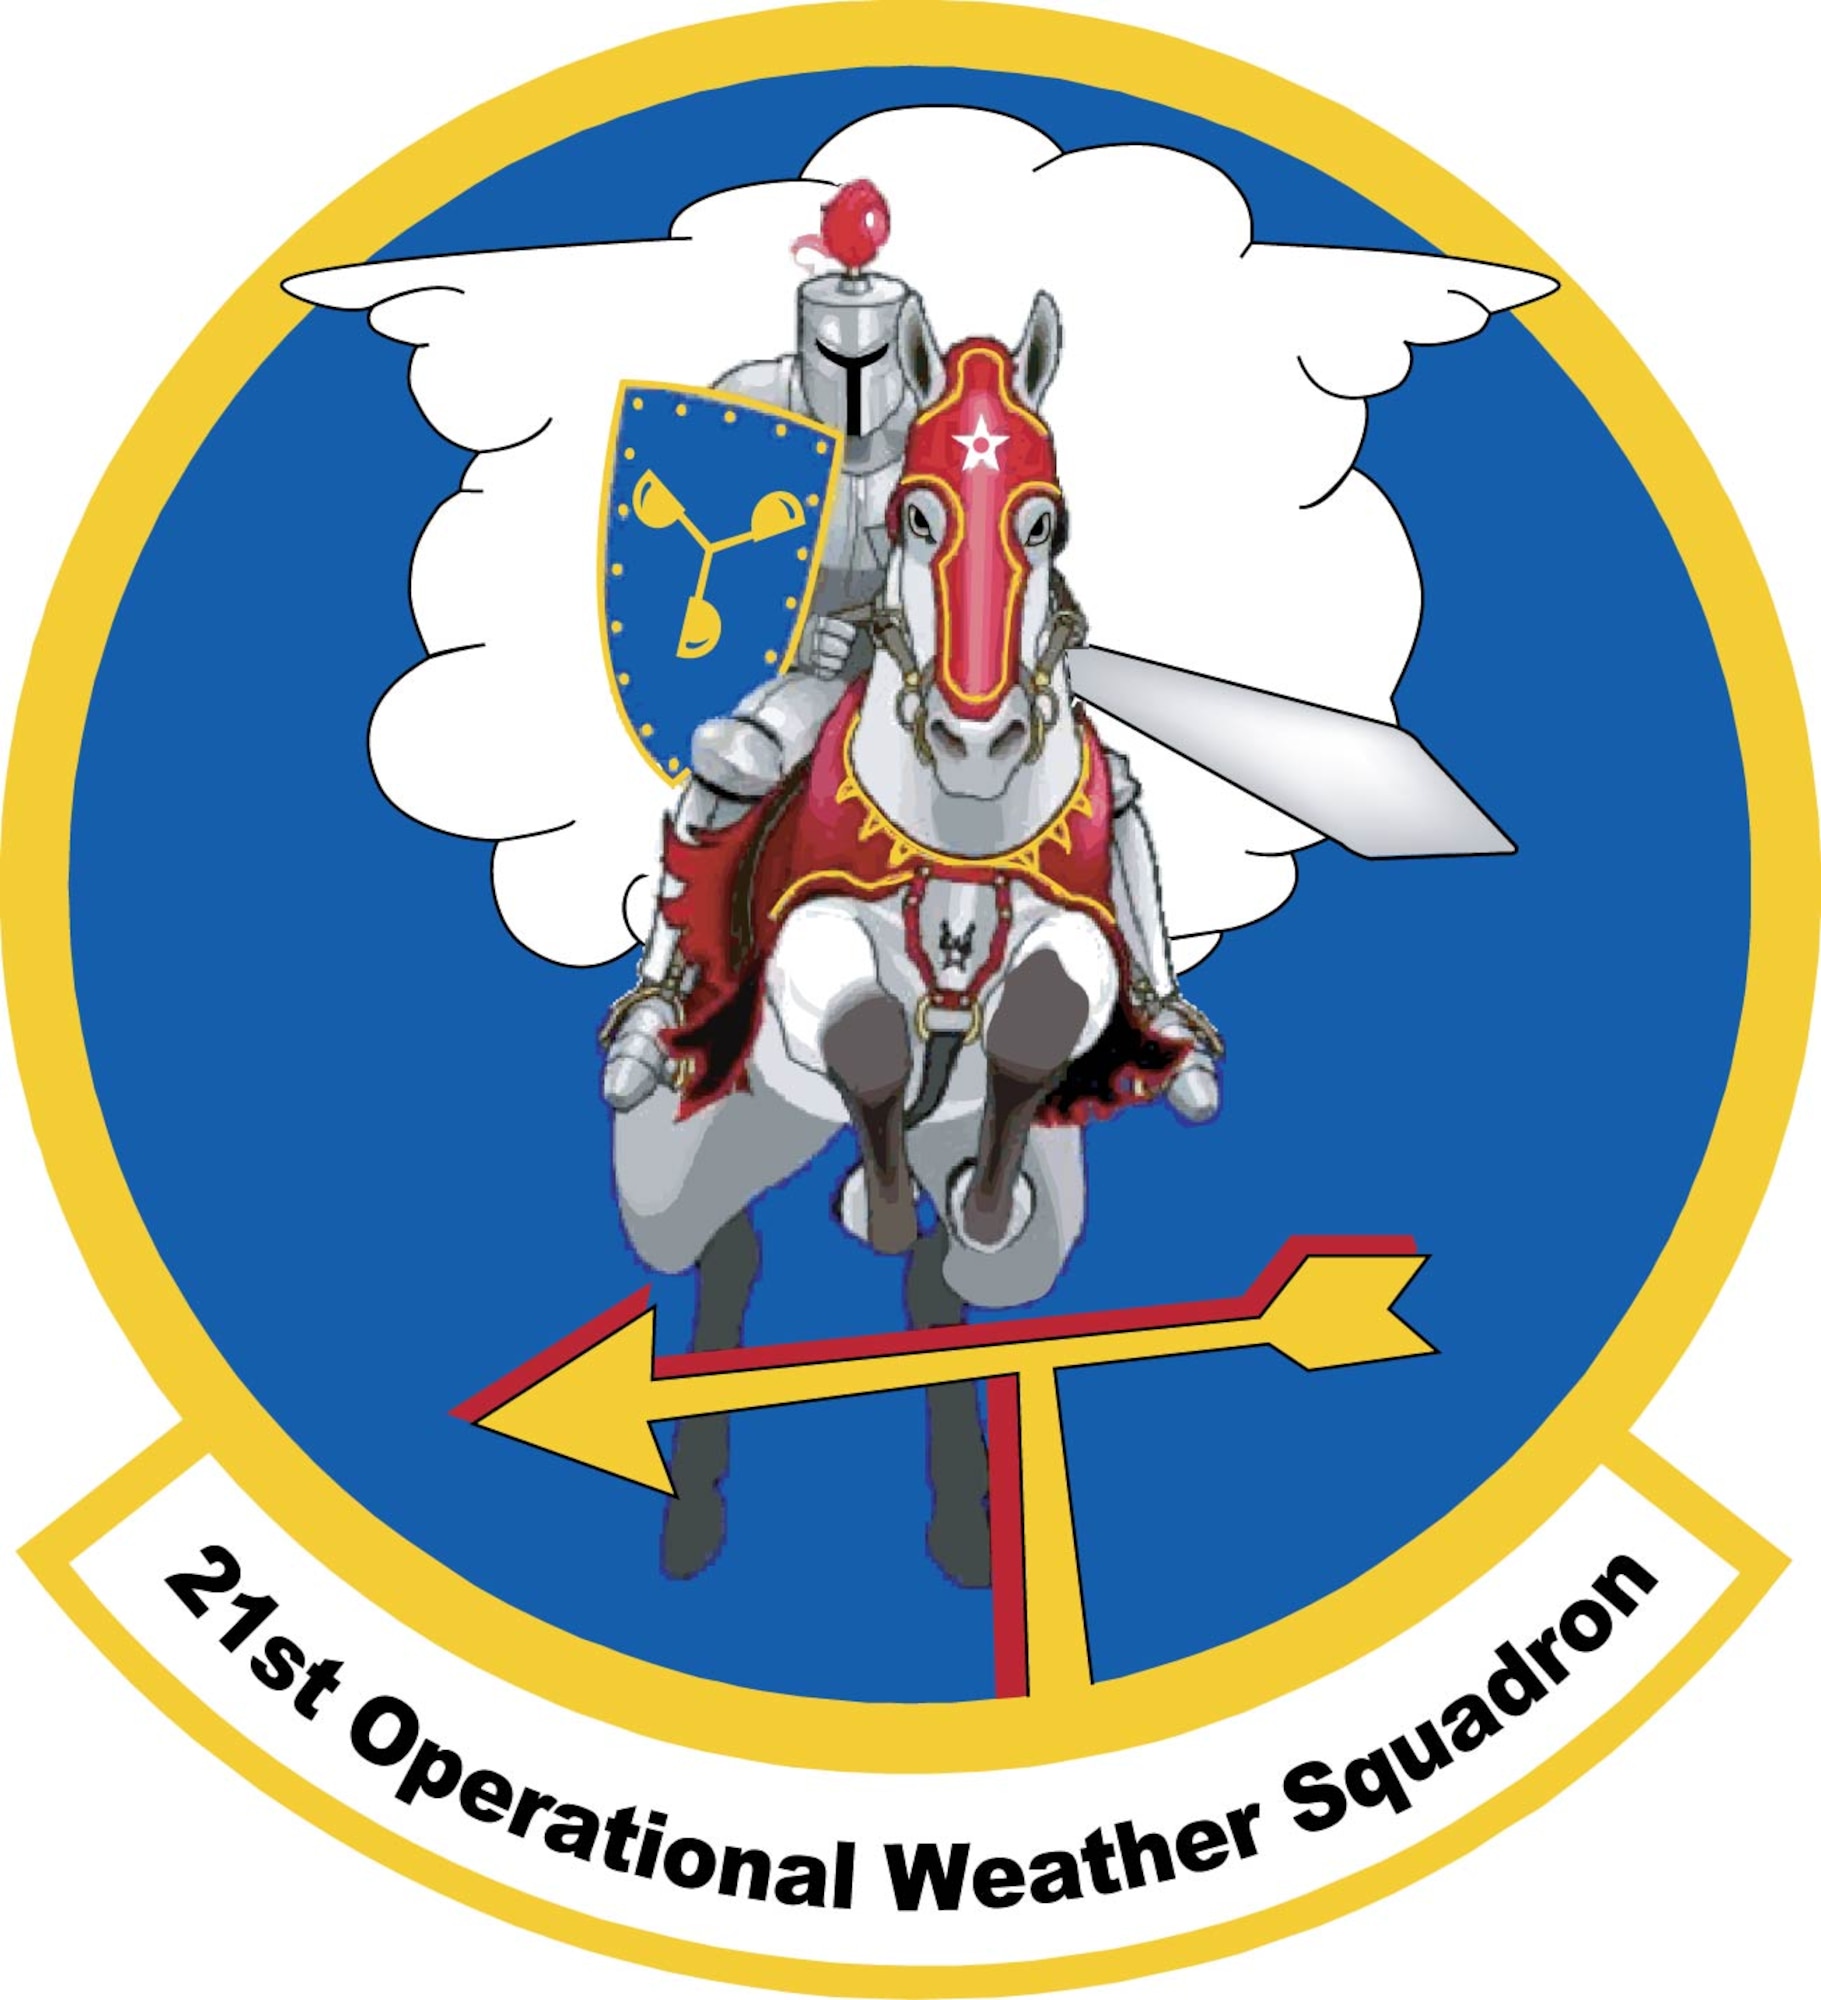 Emblem for the 21st Operational Weather Squadron located at Kapaun AB, Germany.